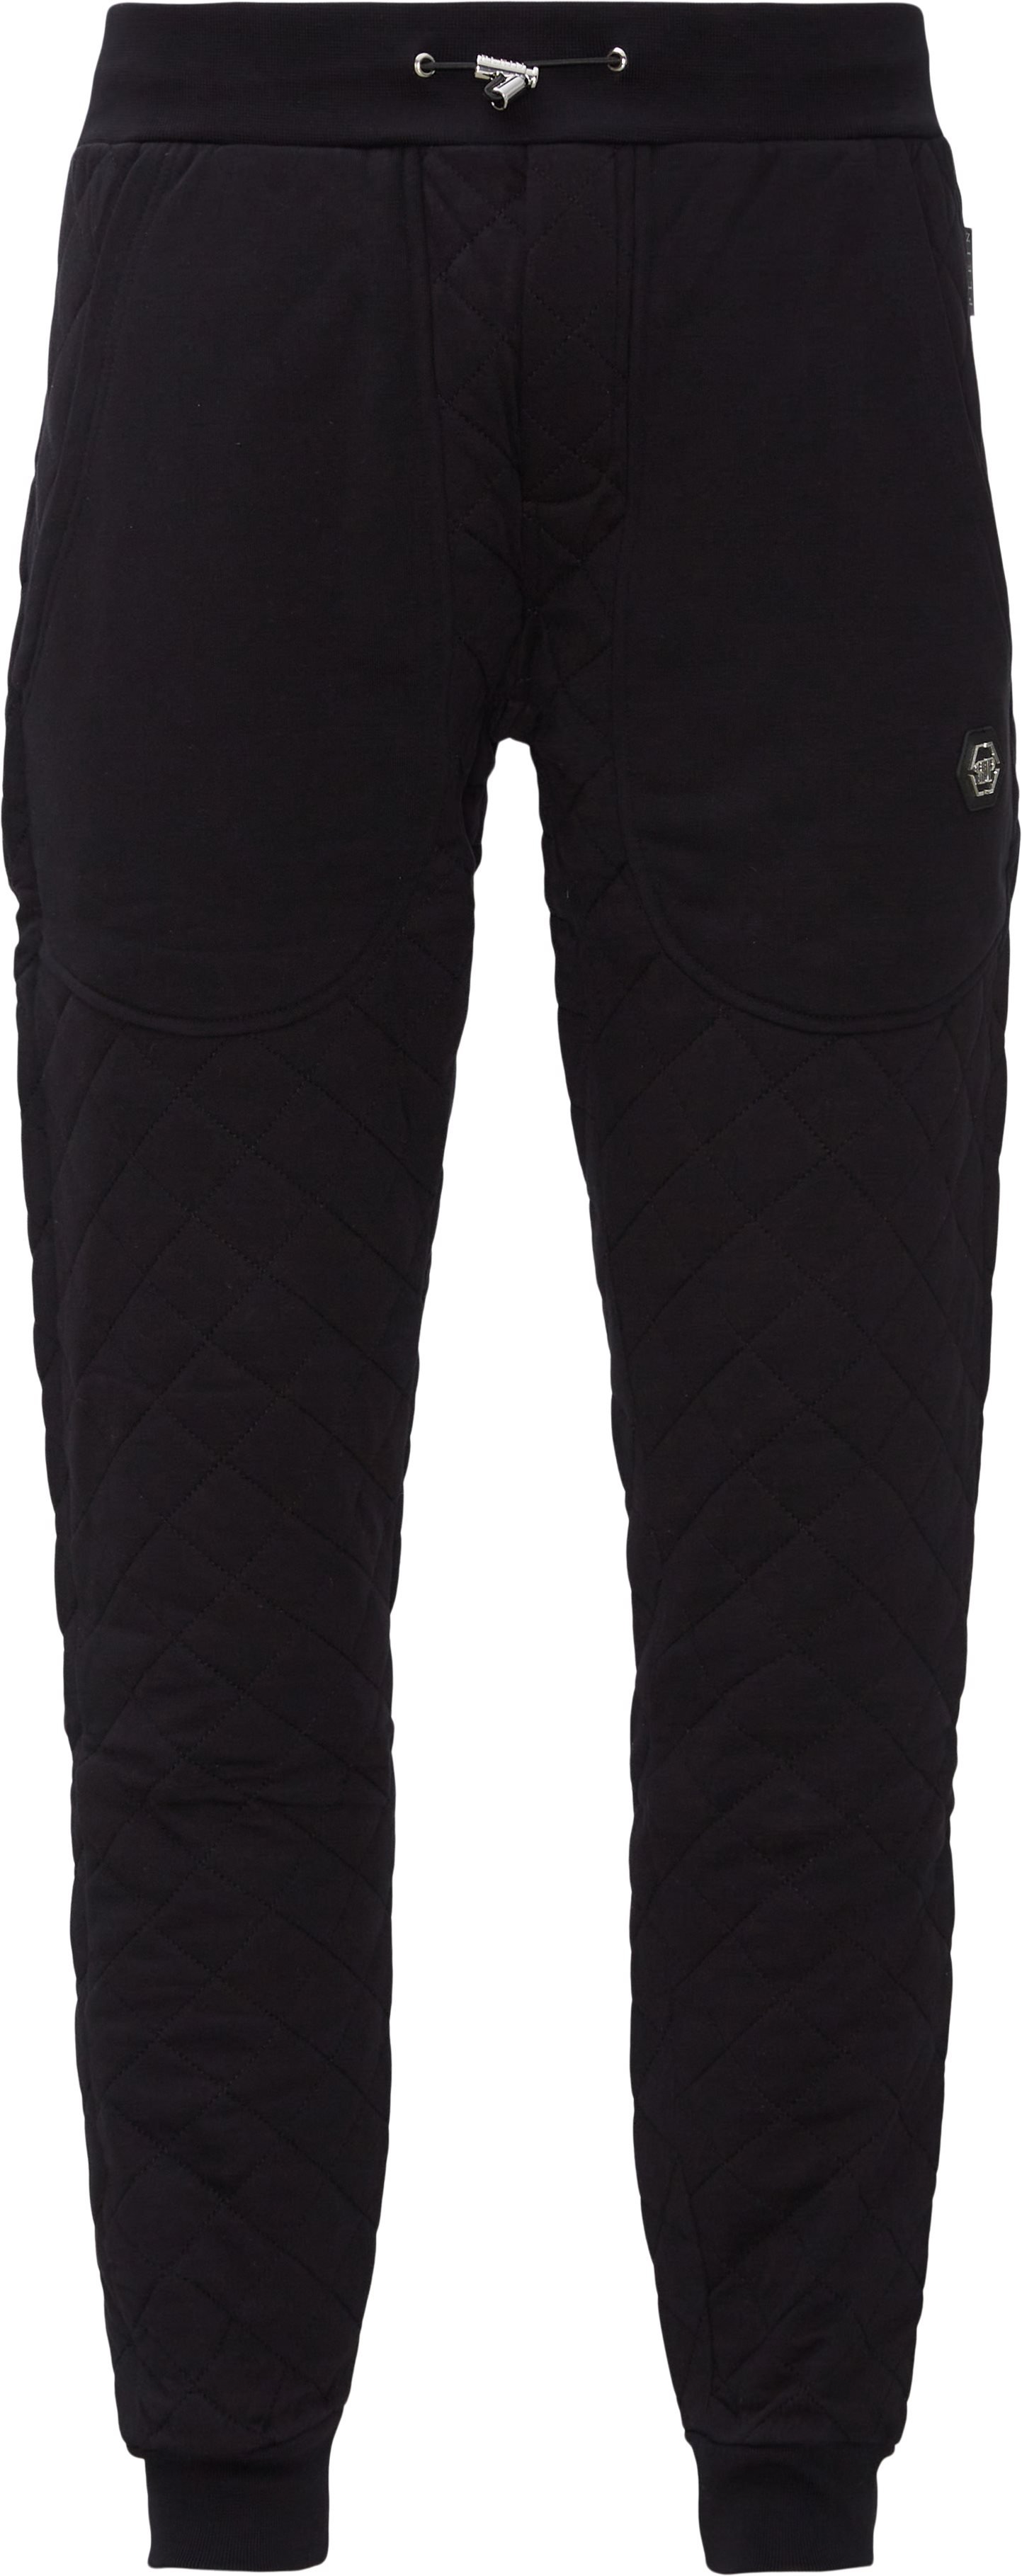 MJT1925 Quilted Hexagon Trousers - Trousers - Regular fit - Black